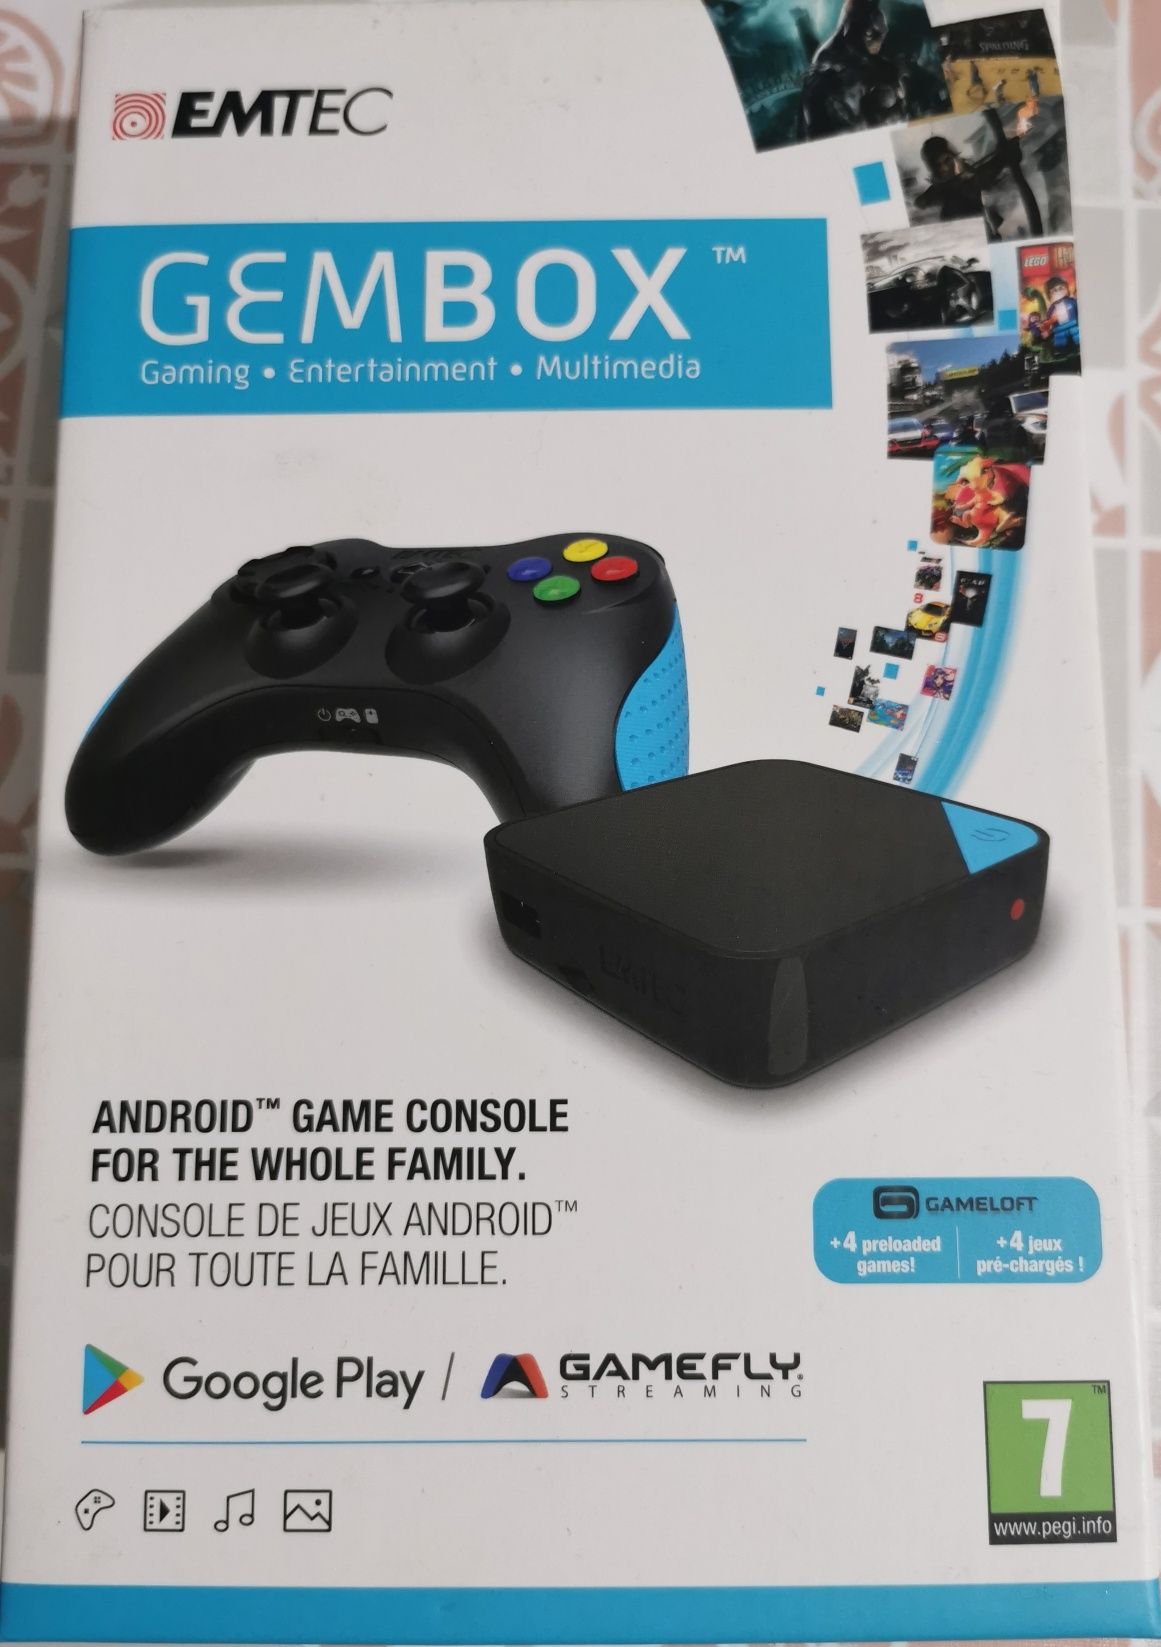 Consola Android Gembox Emtec